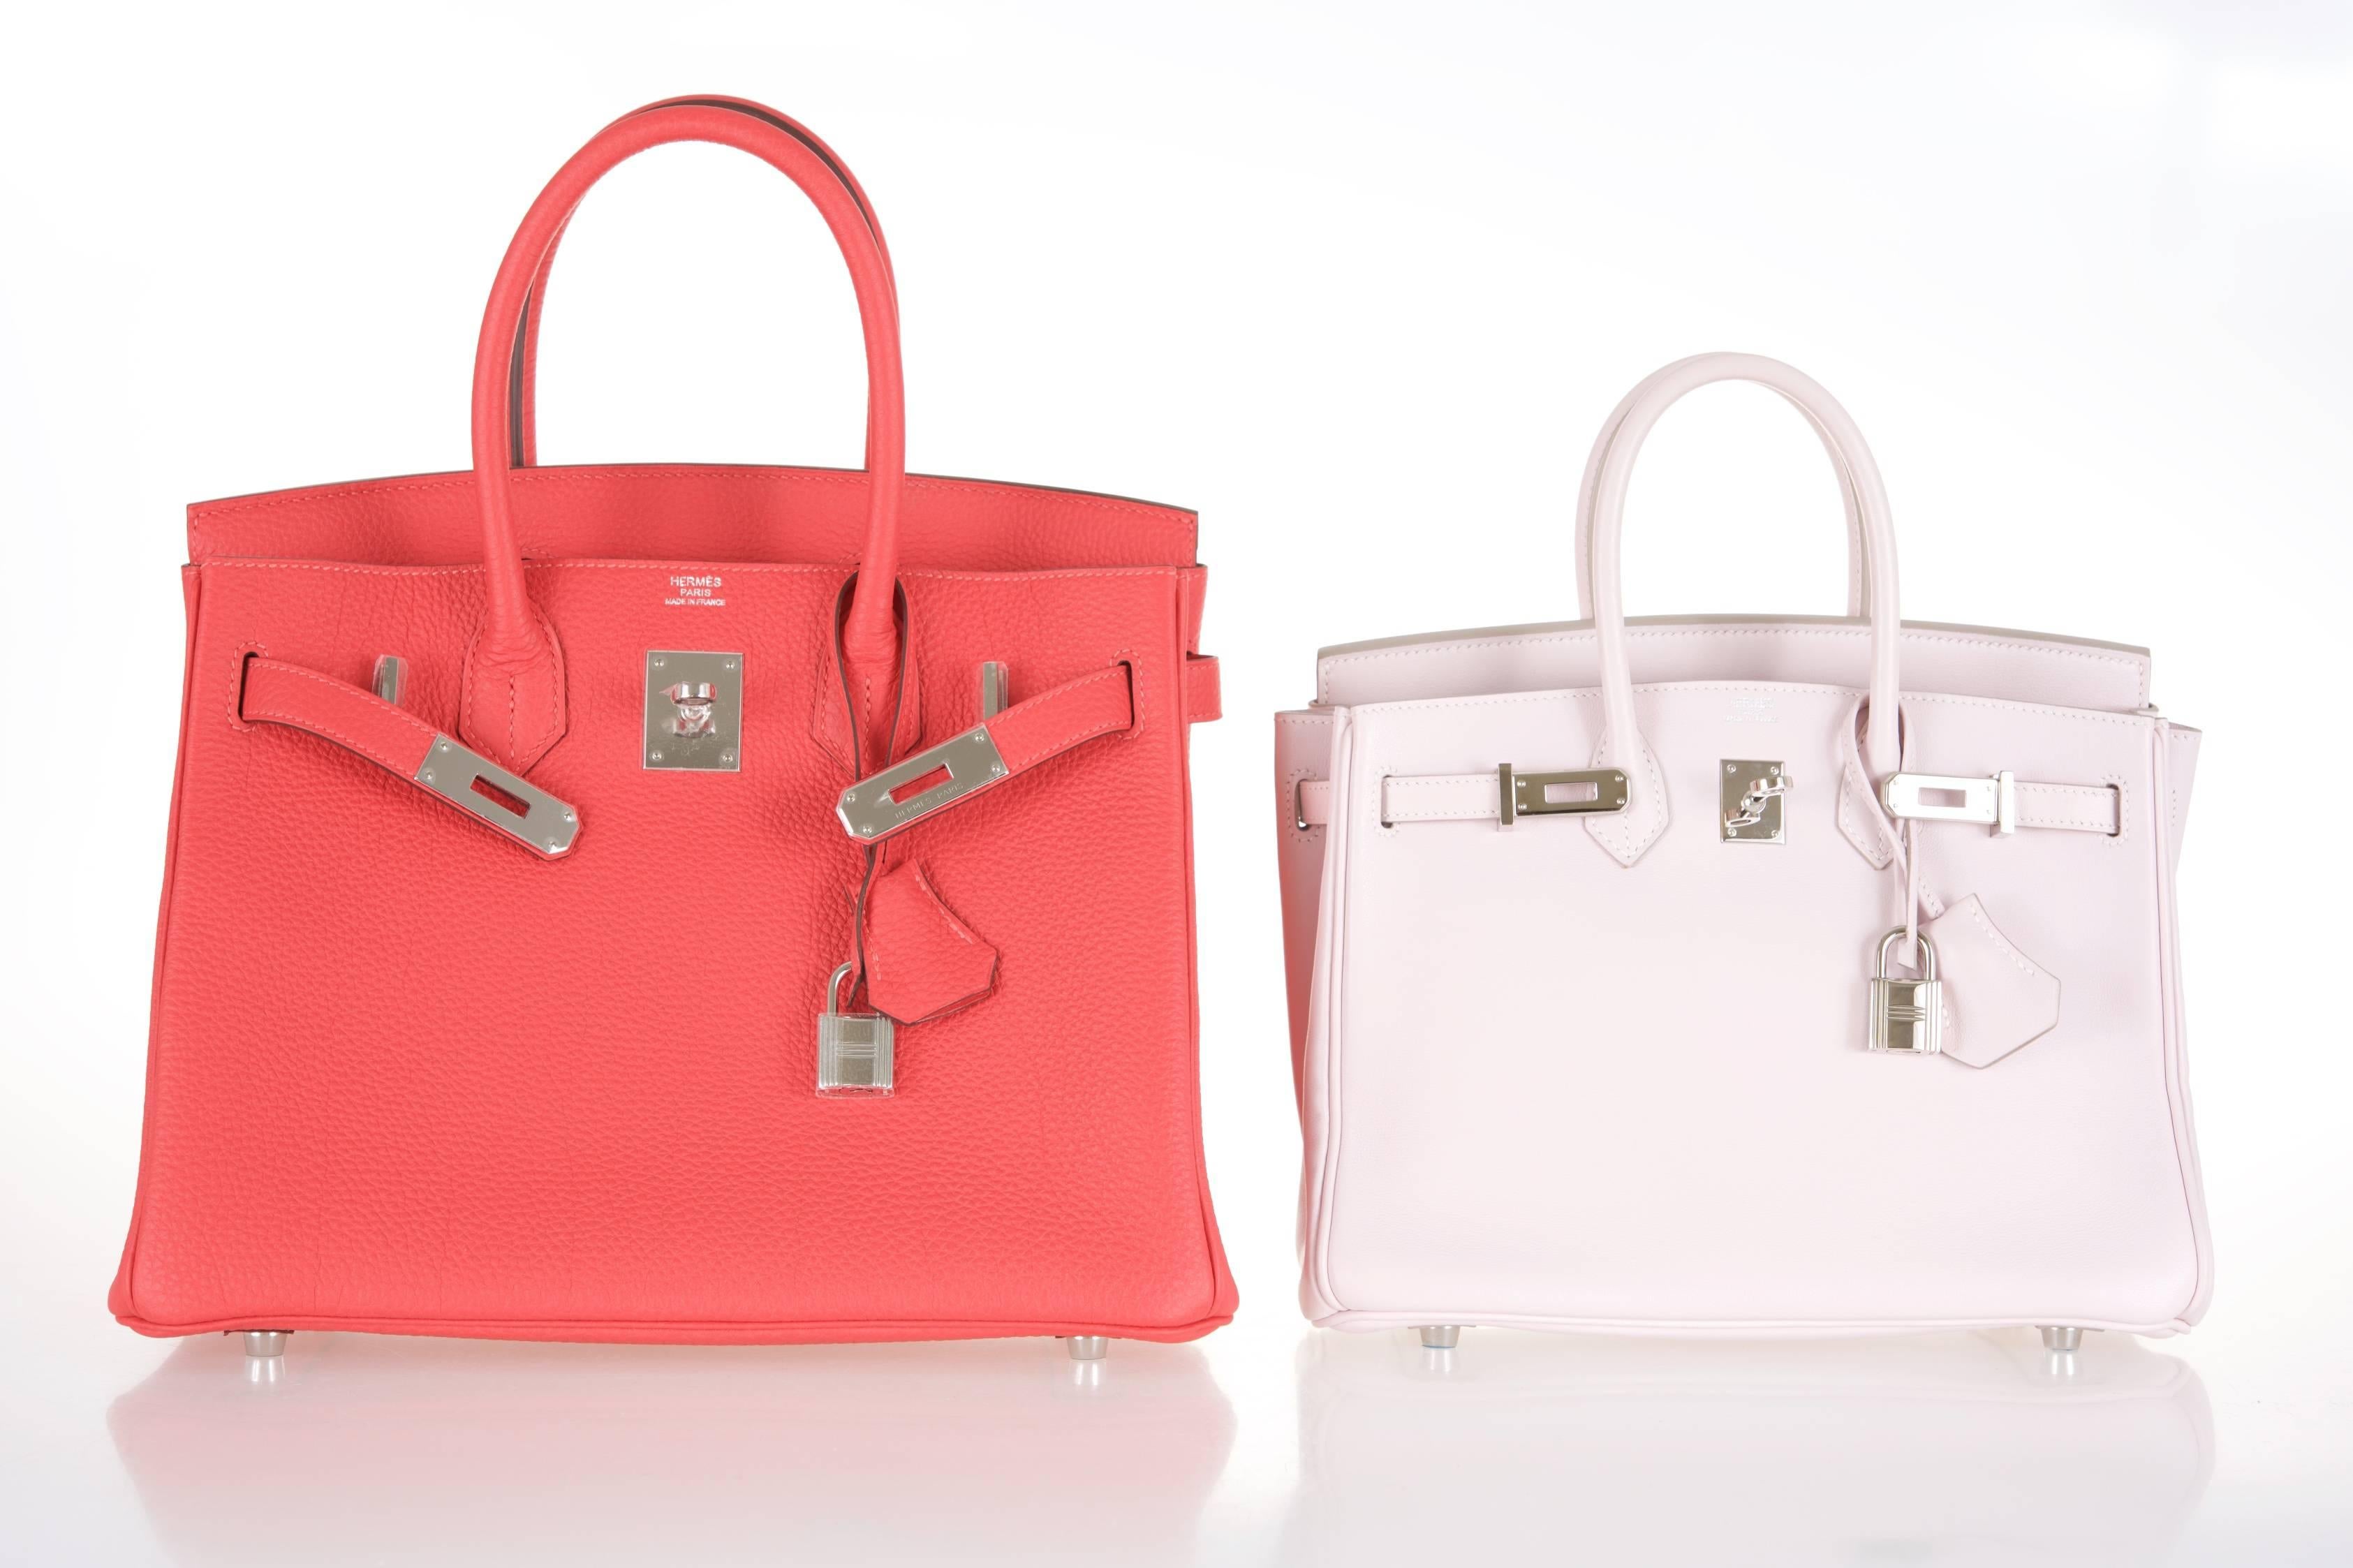 Hermes 30cm 
New 
12" Width x 8" Height x 6” Depth

New colour from Hermes 2014 Autumn Winter collection, Rouge Pivoine, refers to “Peony” in French.

Hermes introduced its 2014 annual theme called Metamorphose.
The company’s ethos